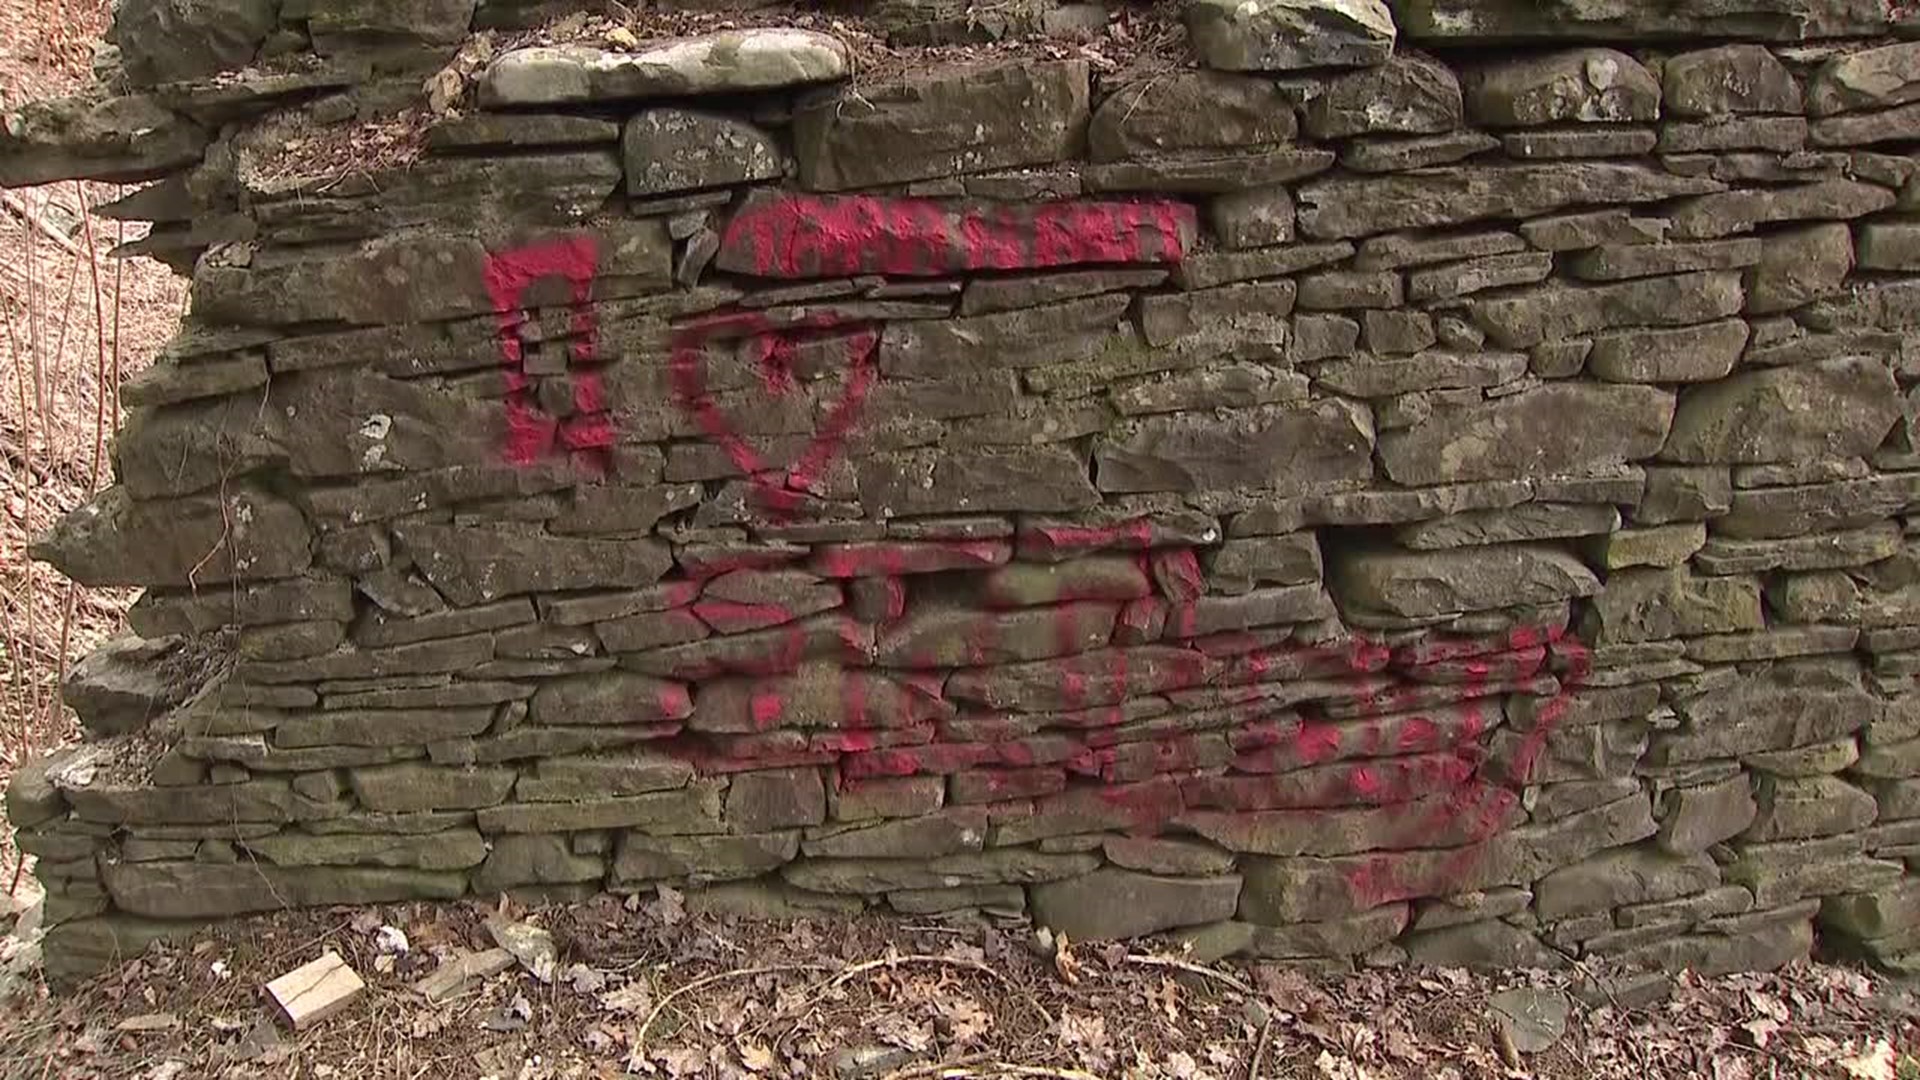 "I heart Tara" was written across the original 1892 date stone, while more red paint was used on the walls of the woolen mill to write "I heart Anthony."